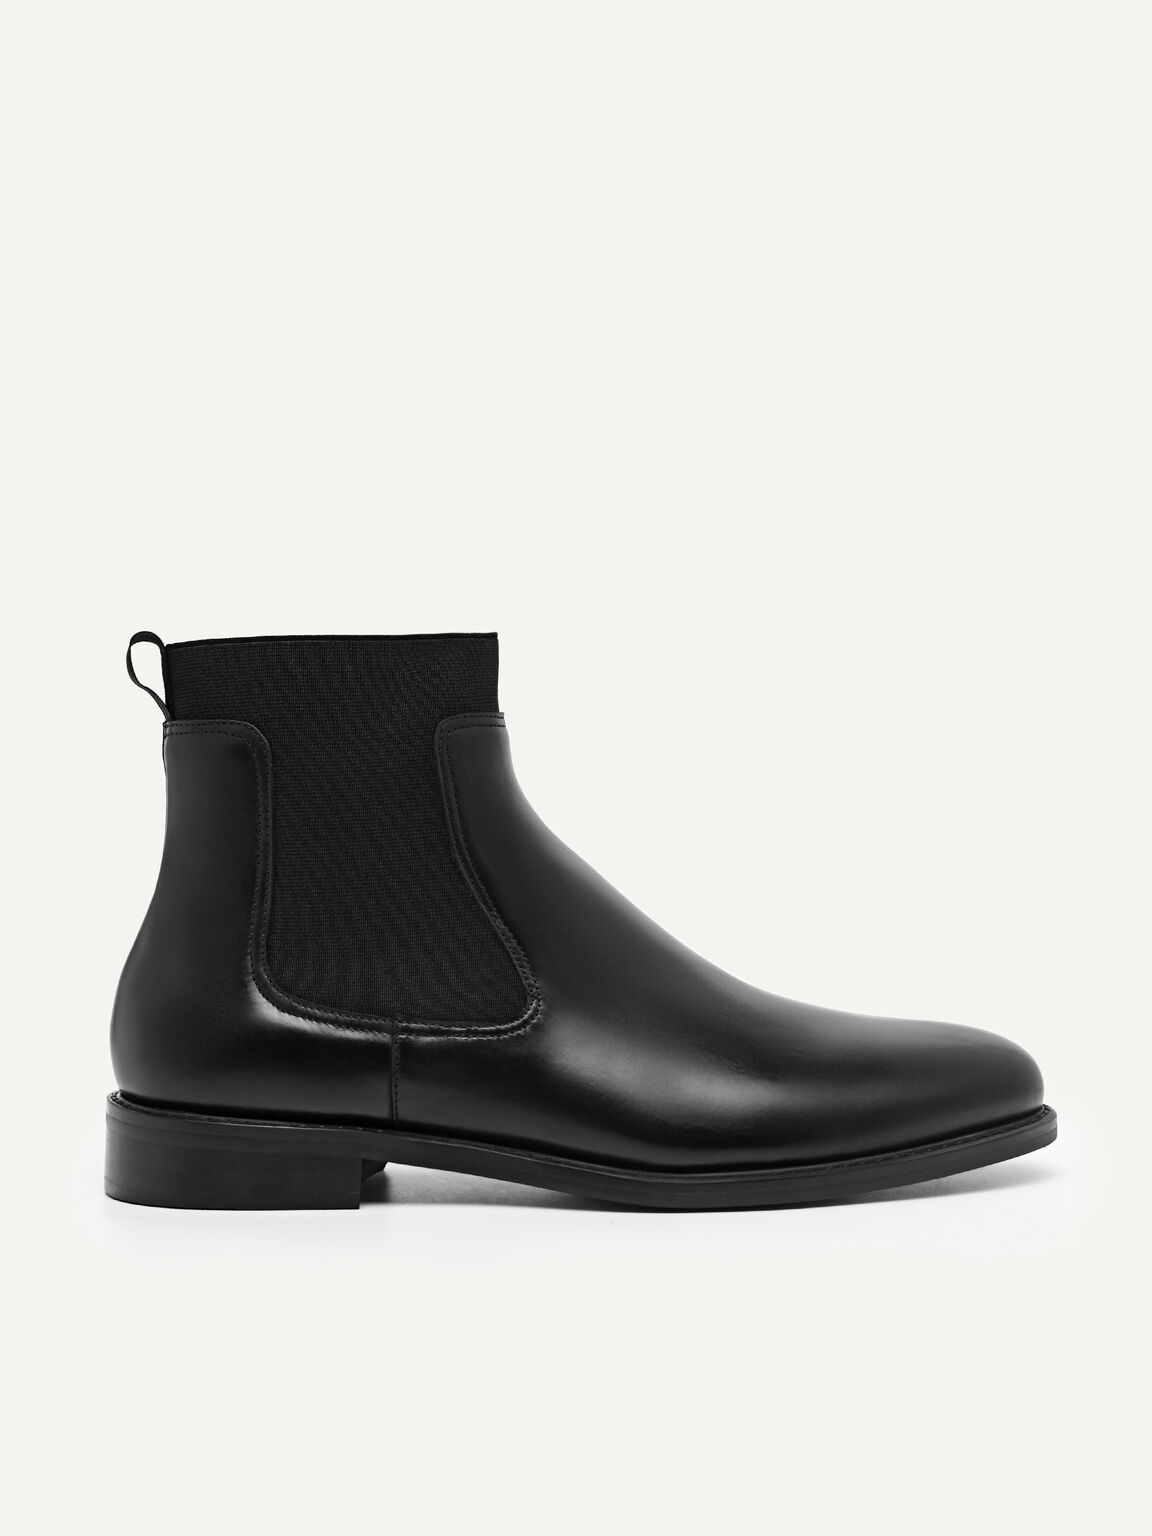 Sonny Leather Chelsea Boots, Black